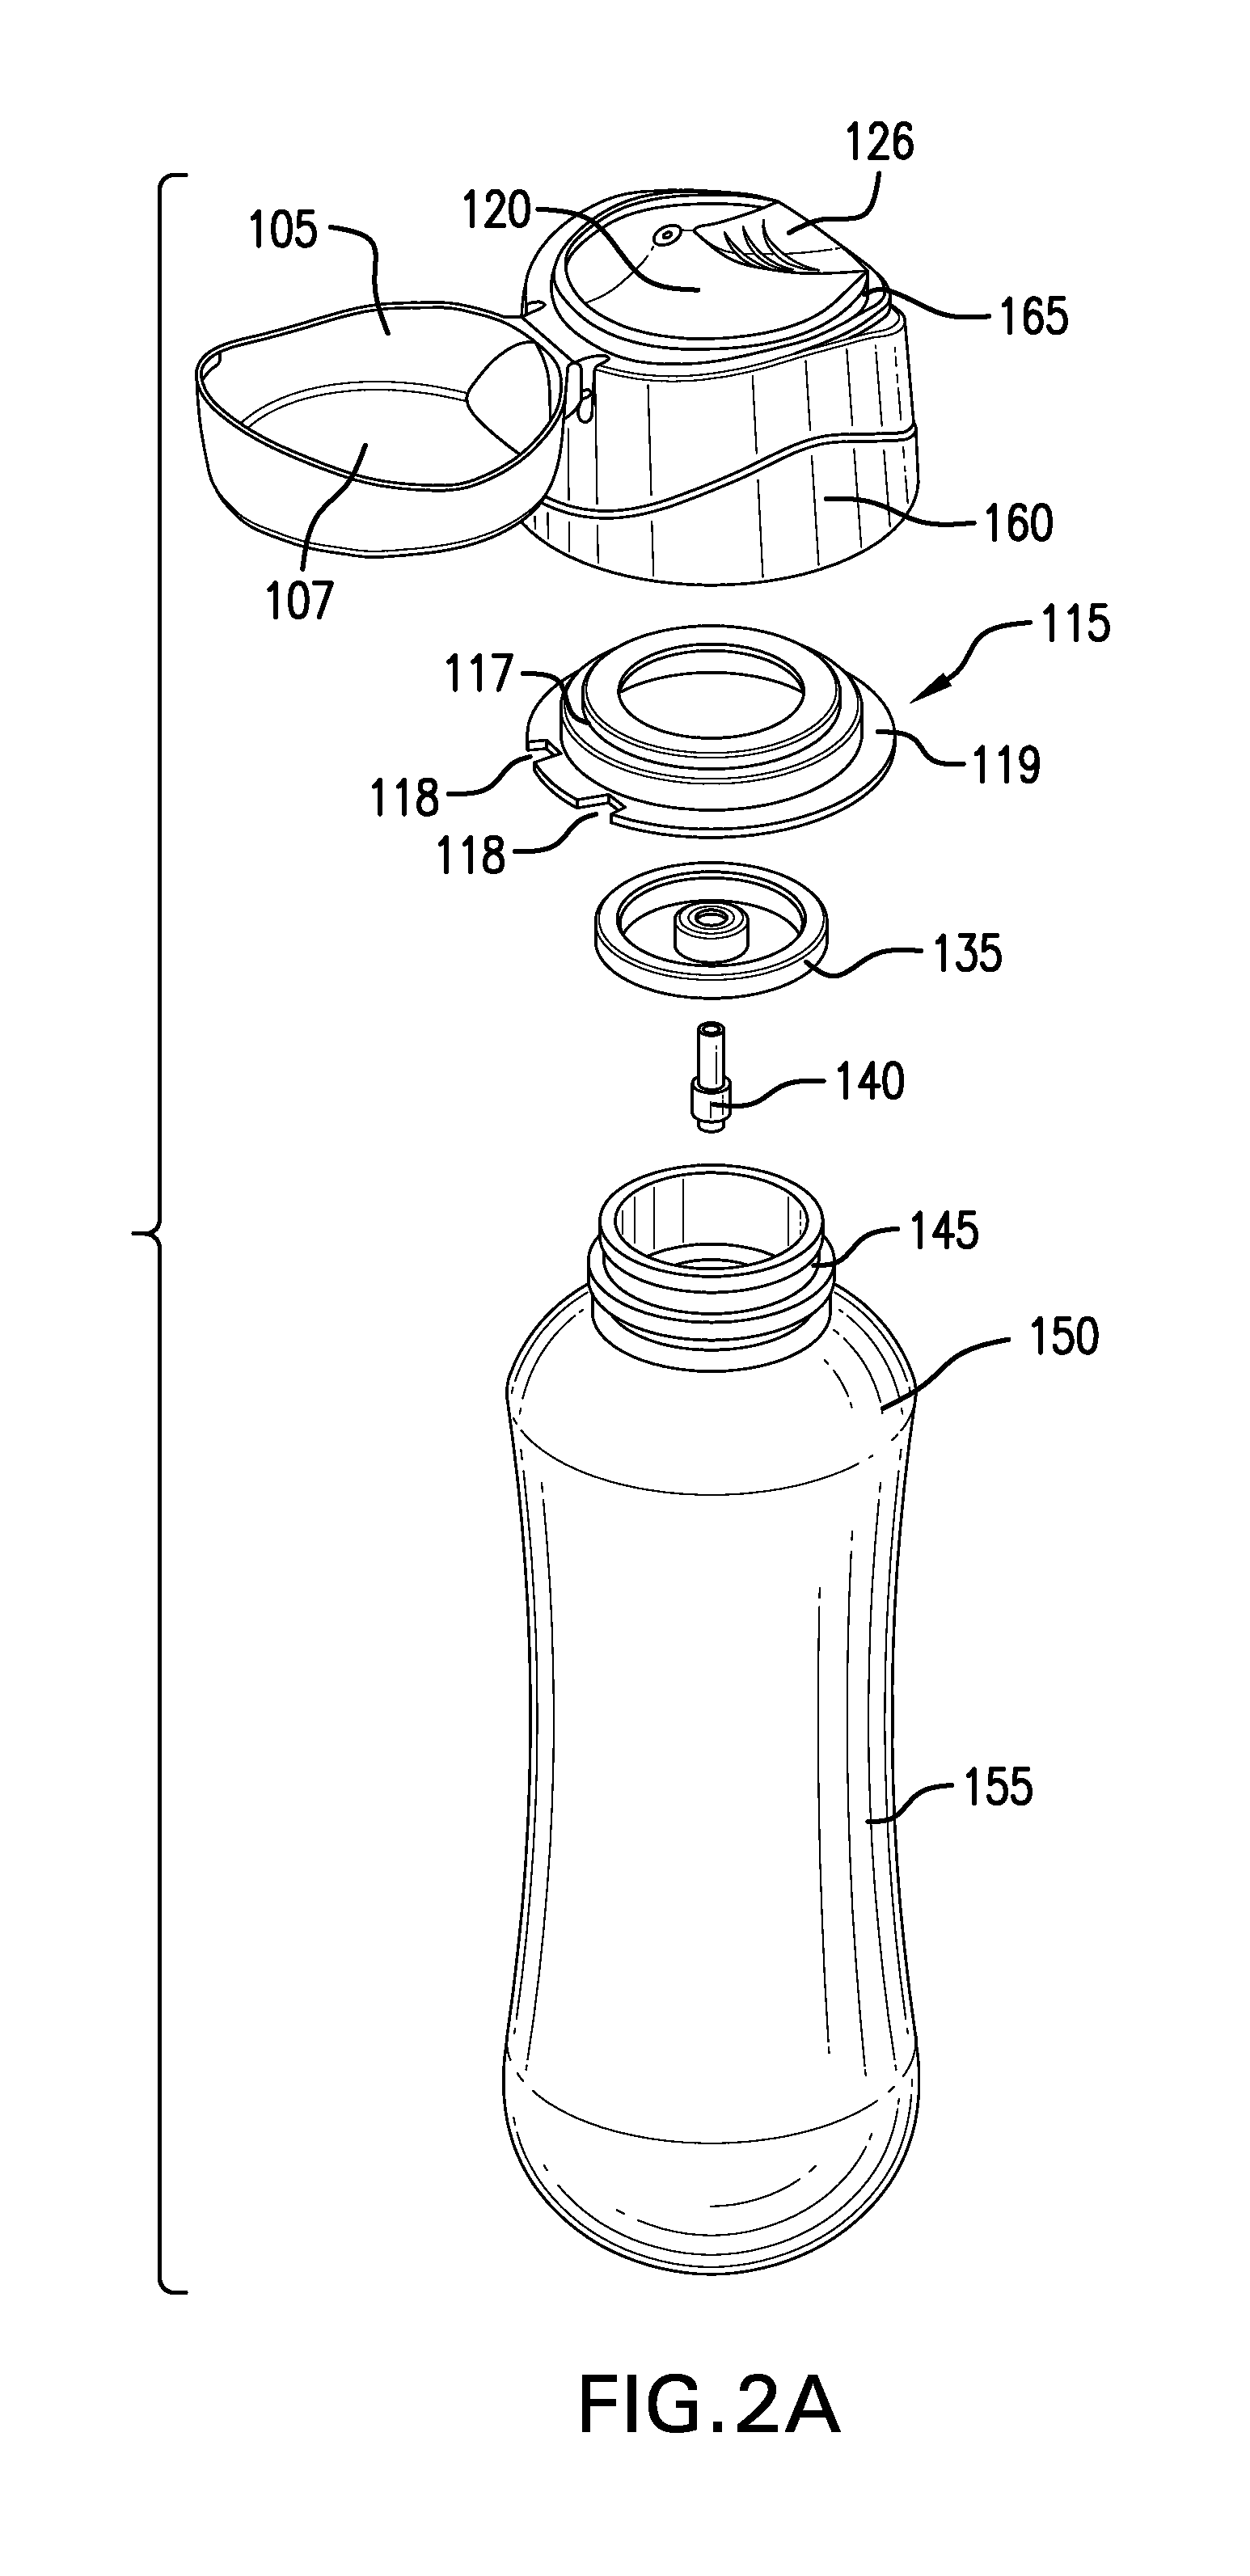 Actuator assembly for a pressurized plastic vessel